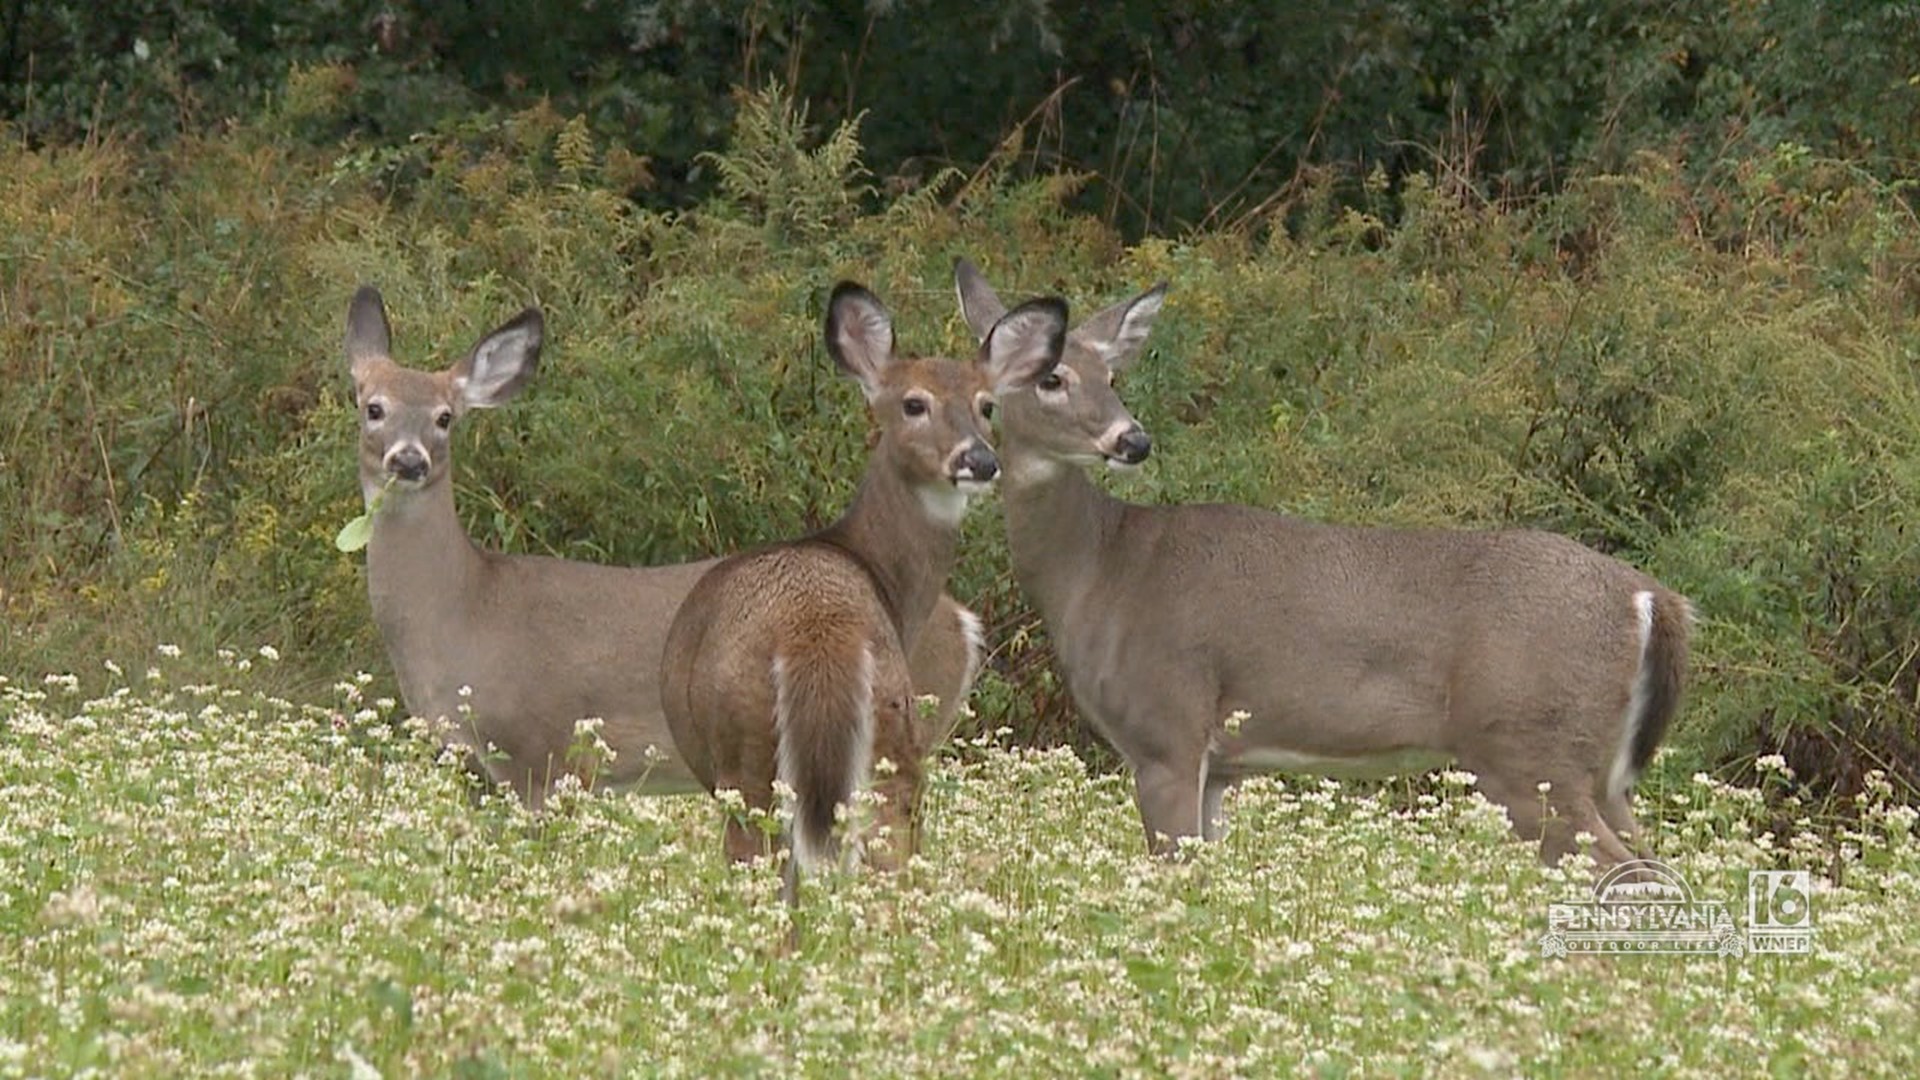 It takes all of us to curb the spread of CWD.